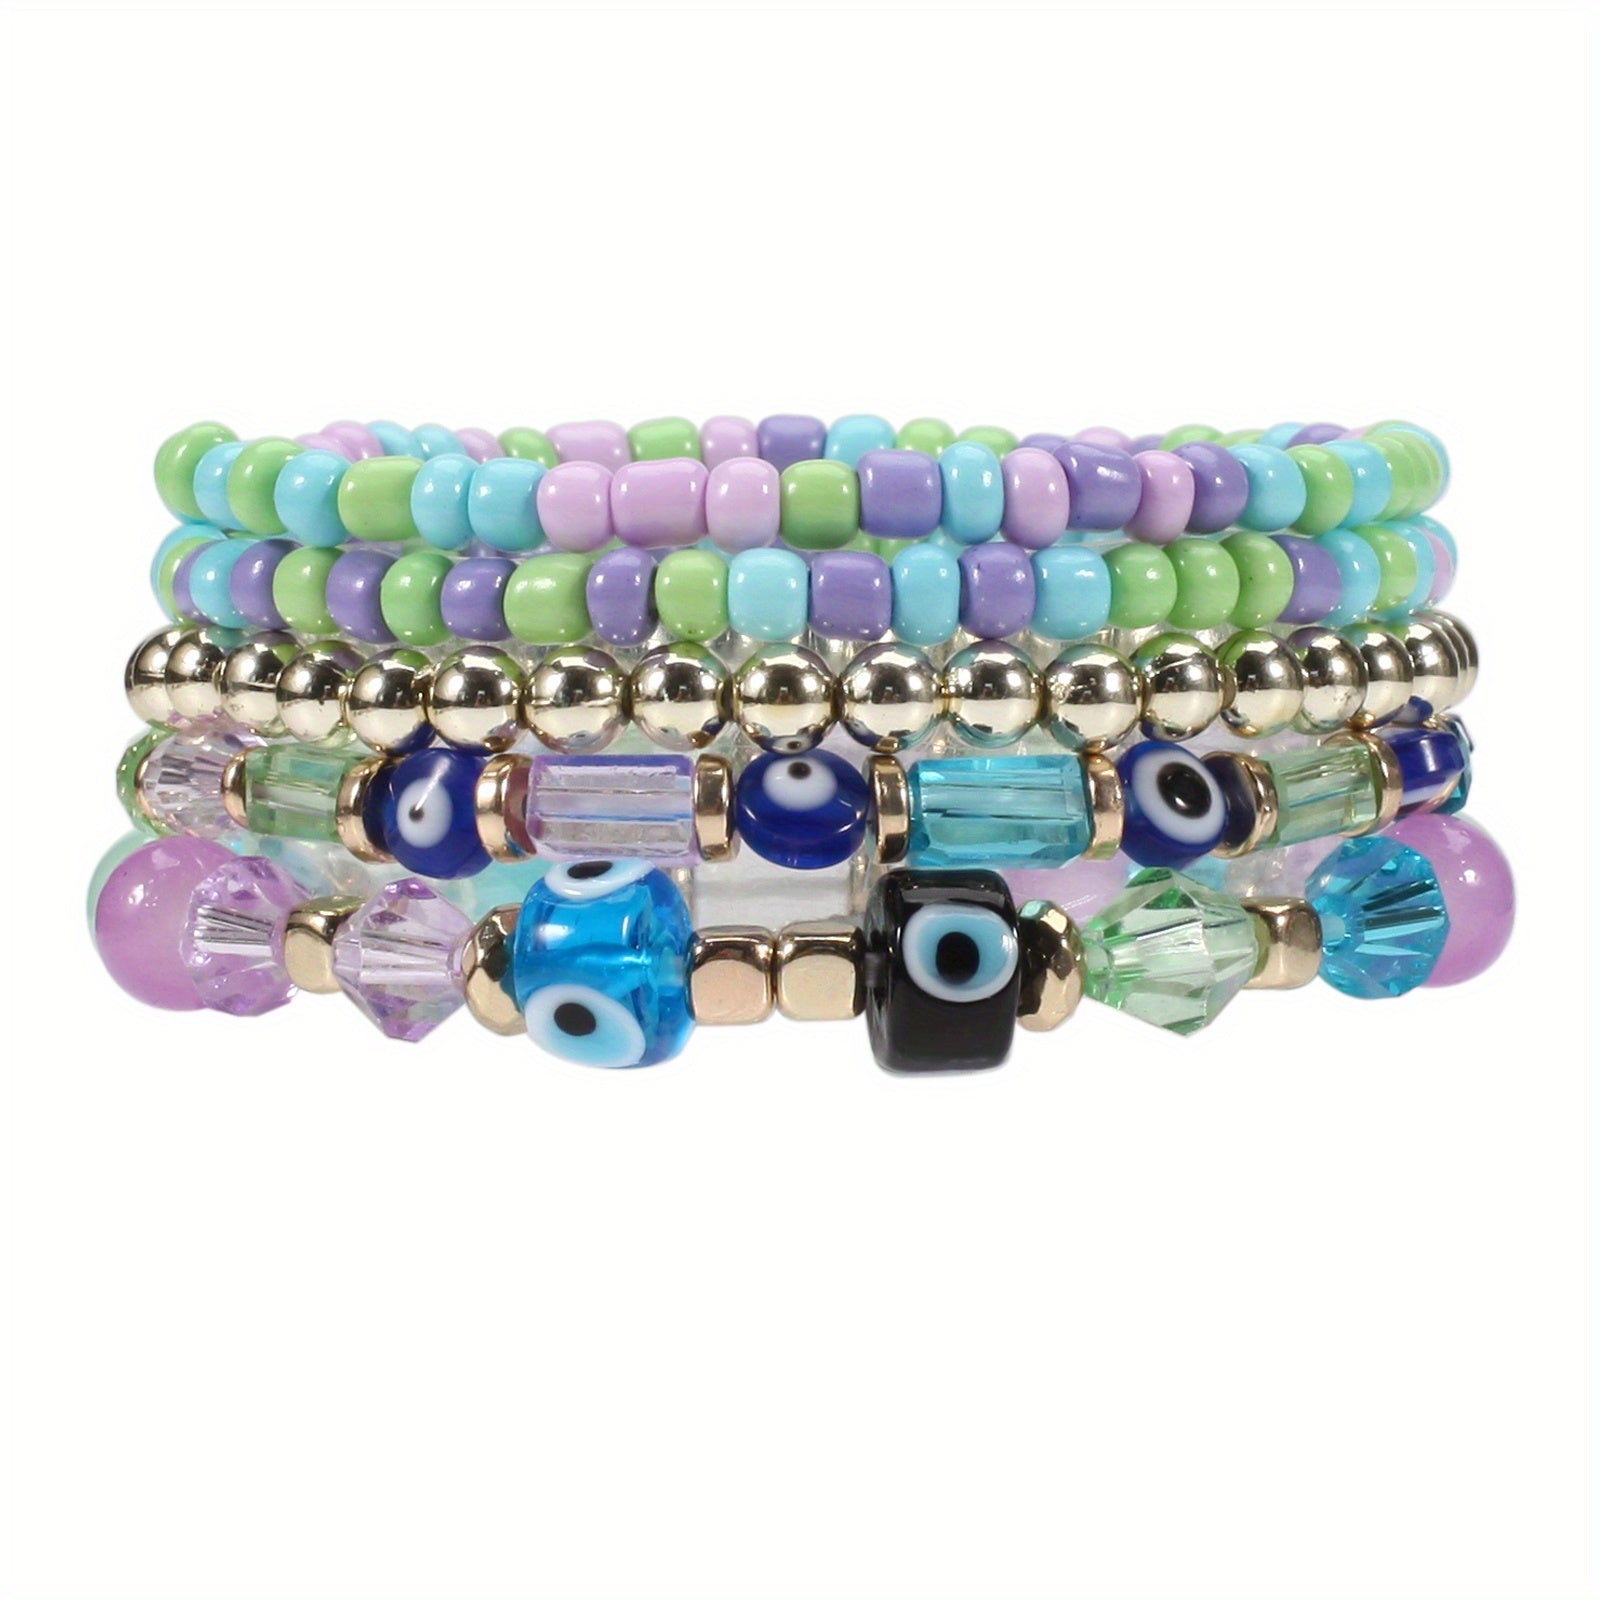 Boho Style Beaded Bracelet Set Stackable Hand Jewelry Accessories For Women